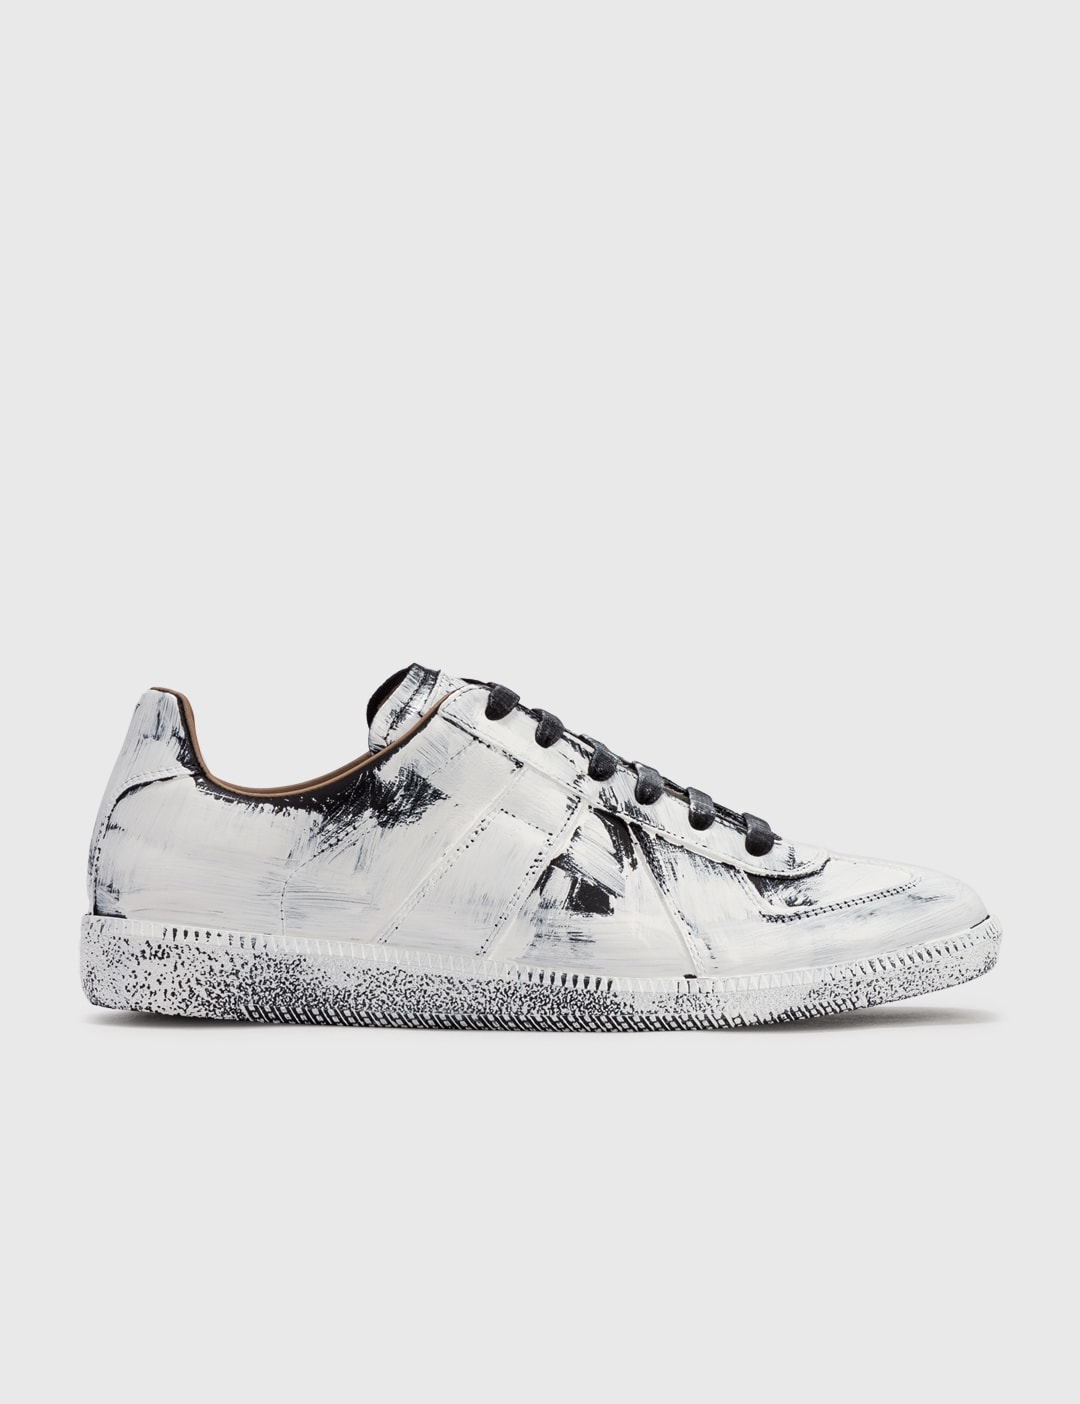 Replica White Paint Sneakers Placeholder Image